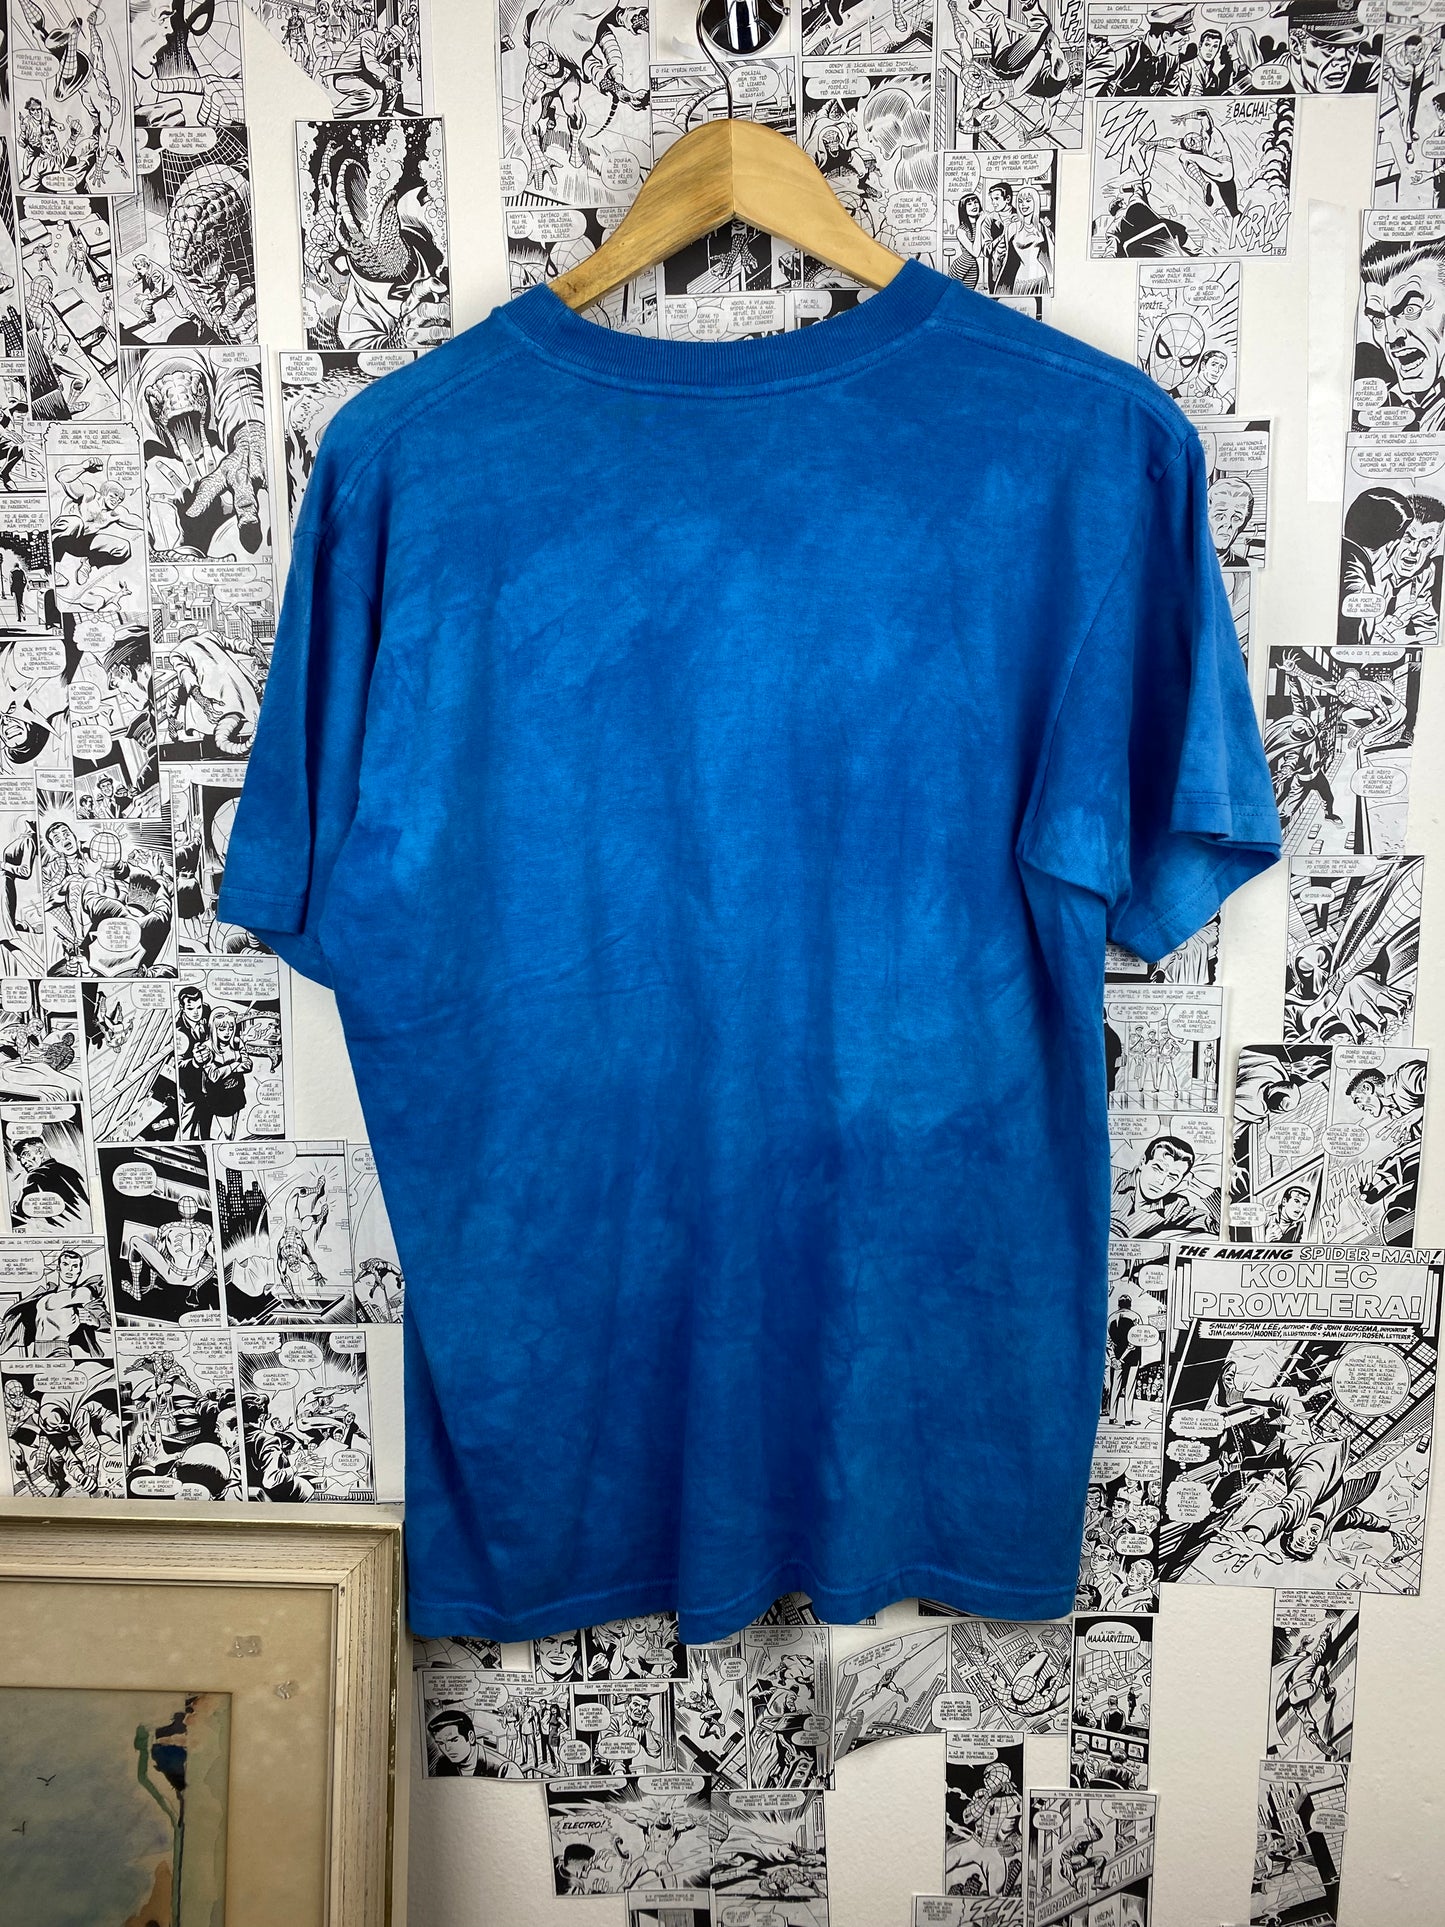 Vintage Dolphin 90s t-shirt - size M